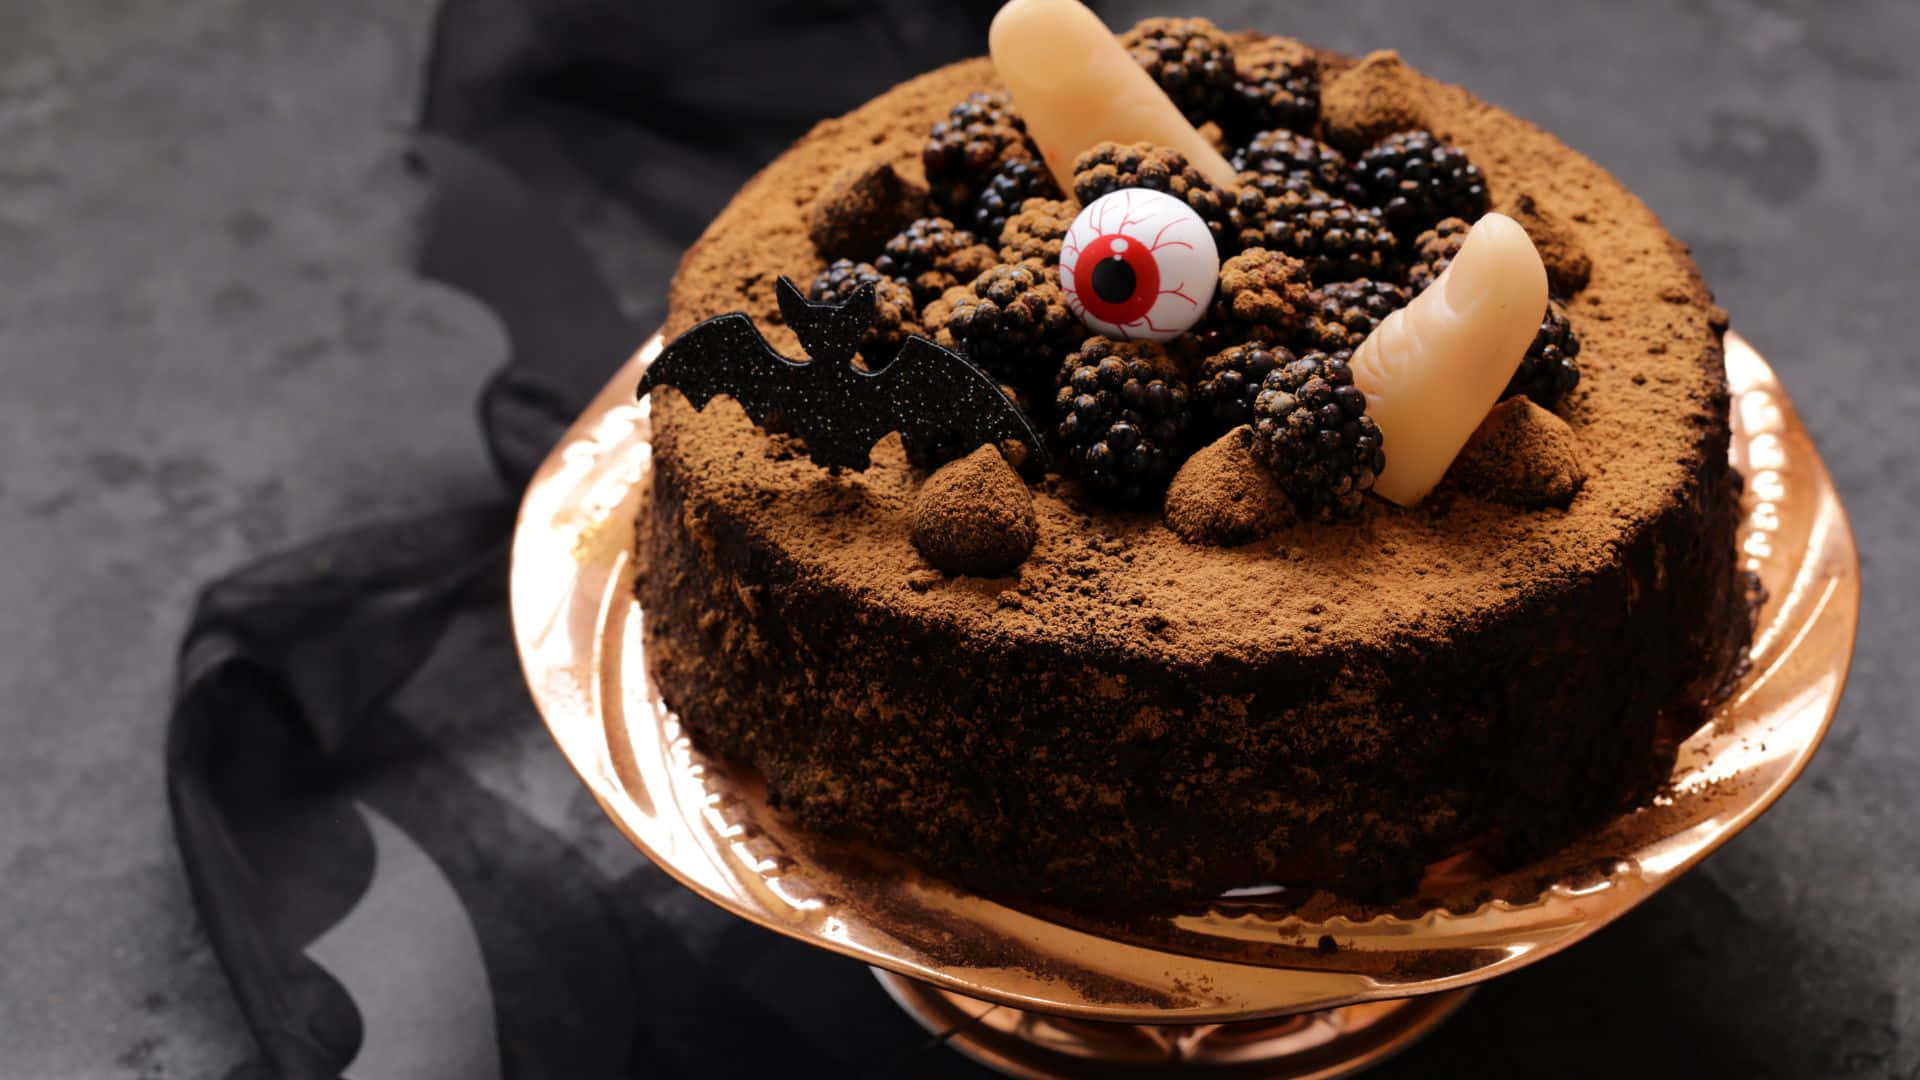 Indulge in Delicious&Seasonal Fun this Halloween with a Spooky Silver Cake! Wallpaper